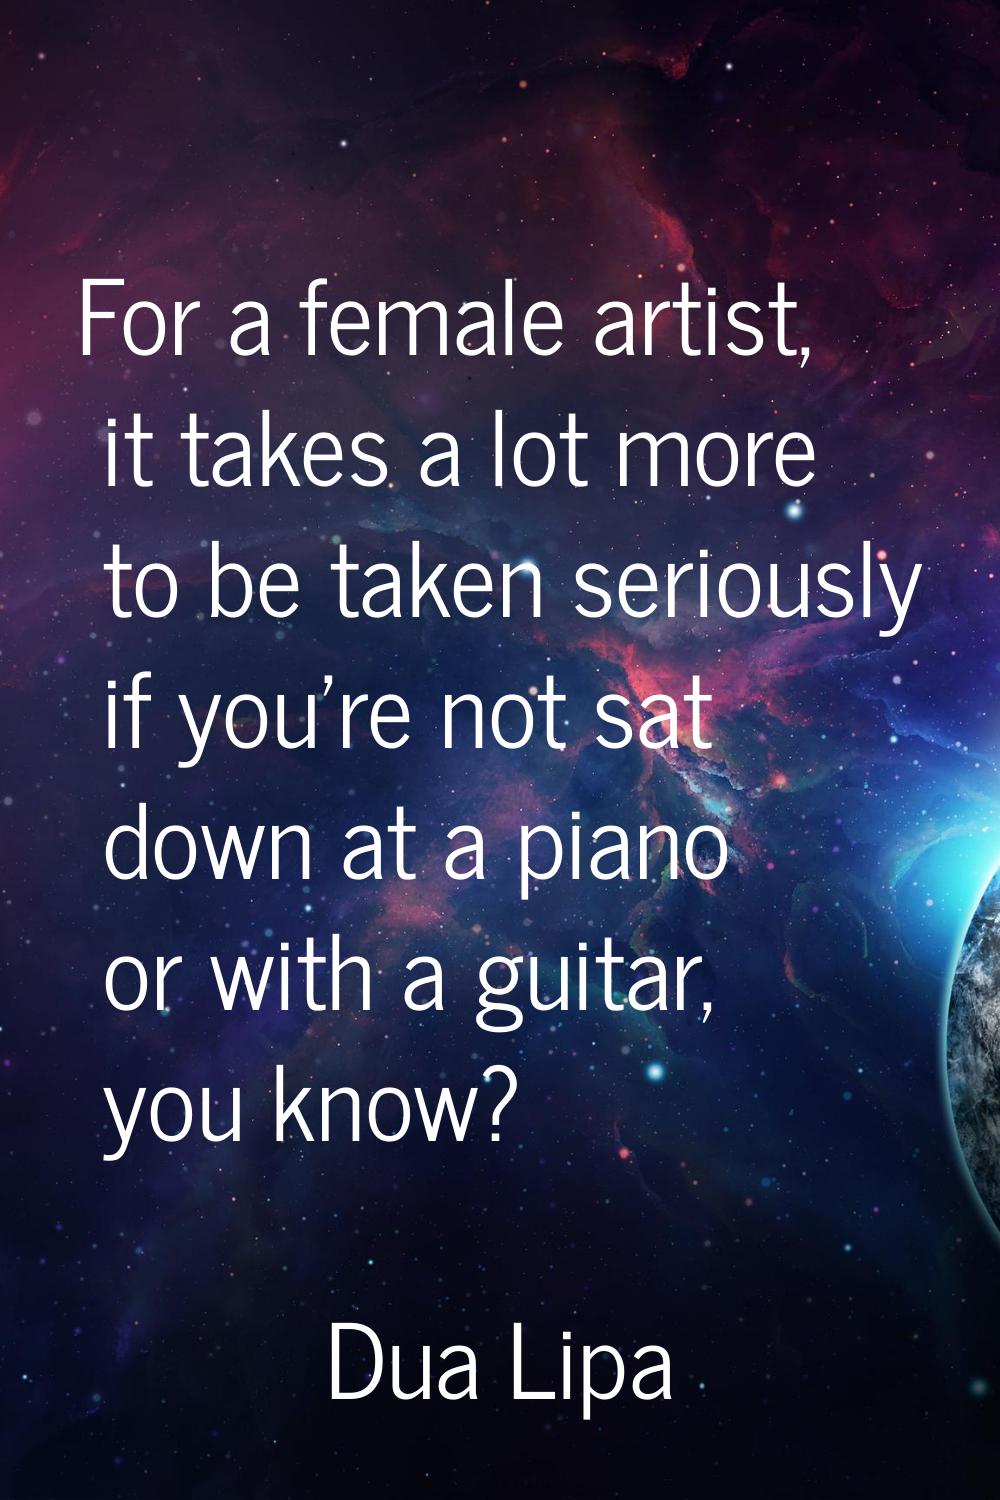 For a female artist, it takes a lot more to be taken seriously if you're not sat down at a piano or